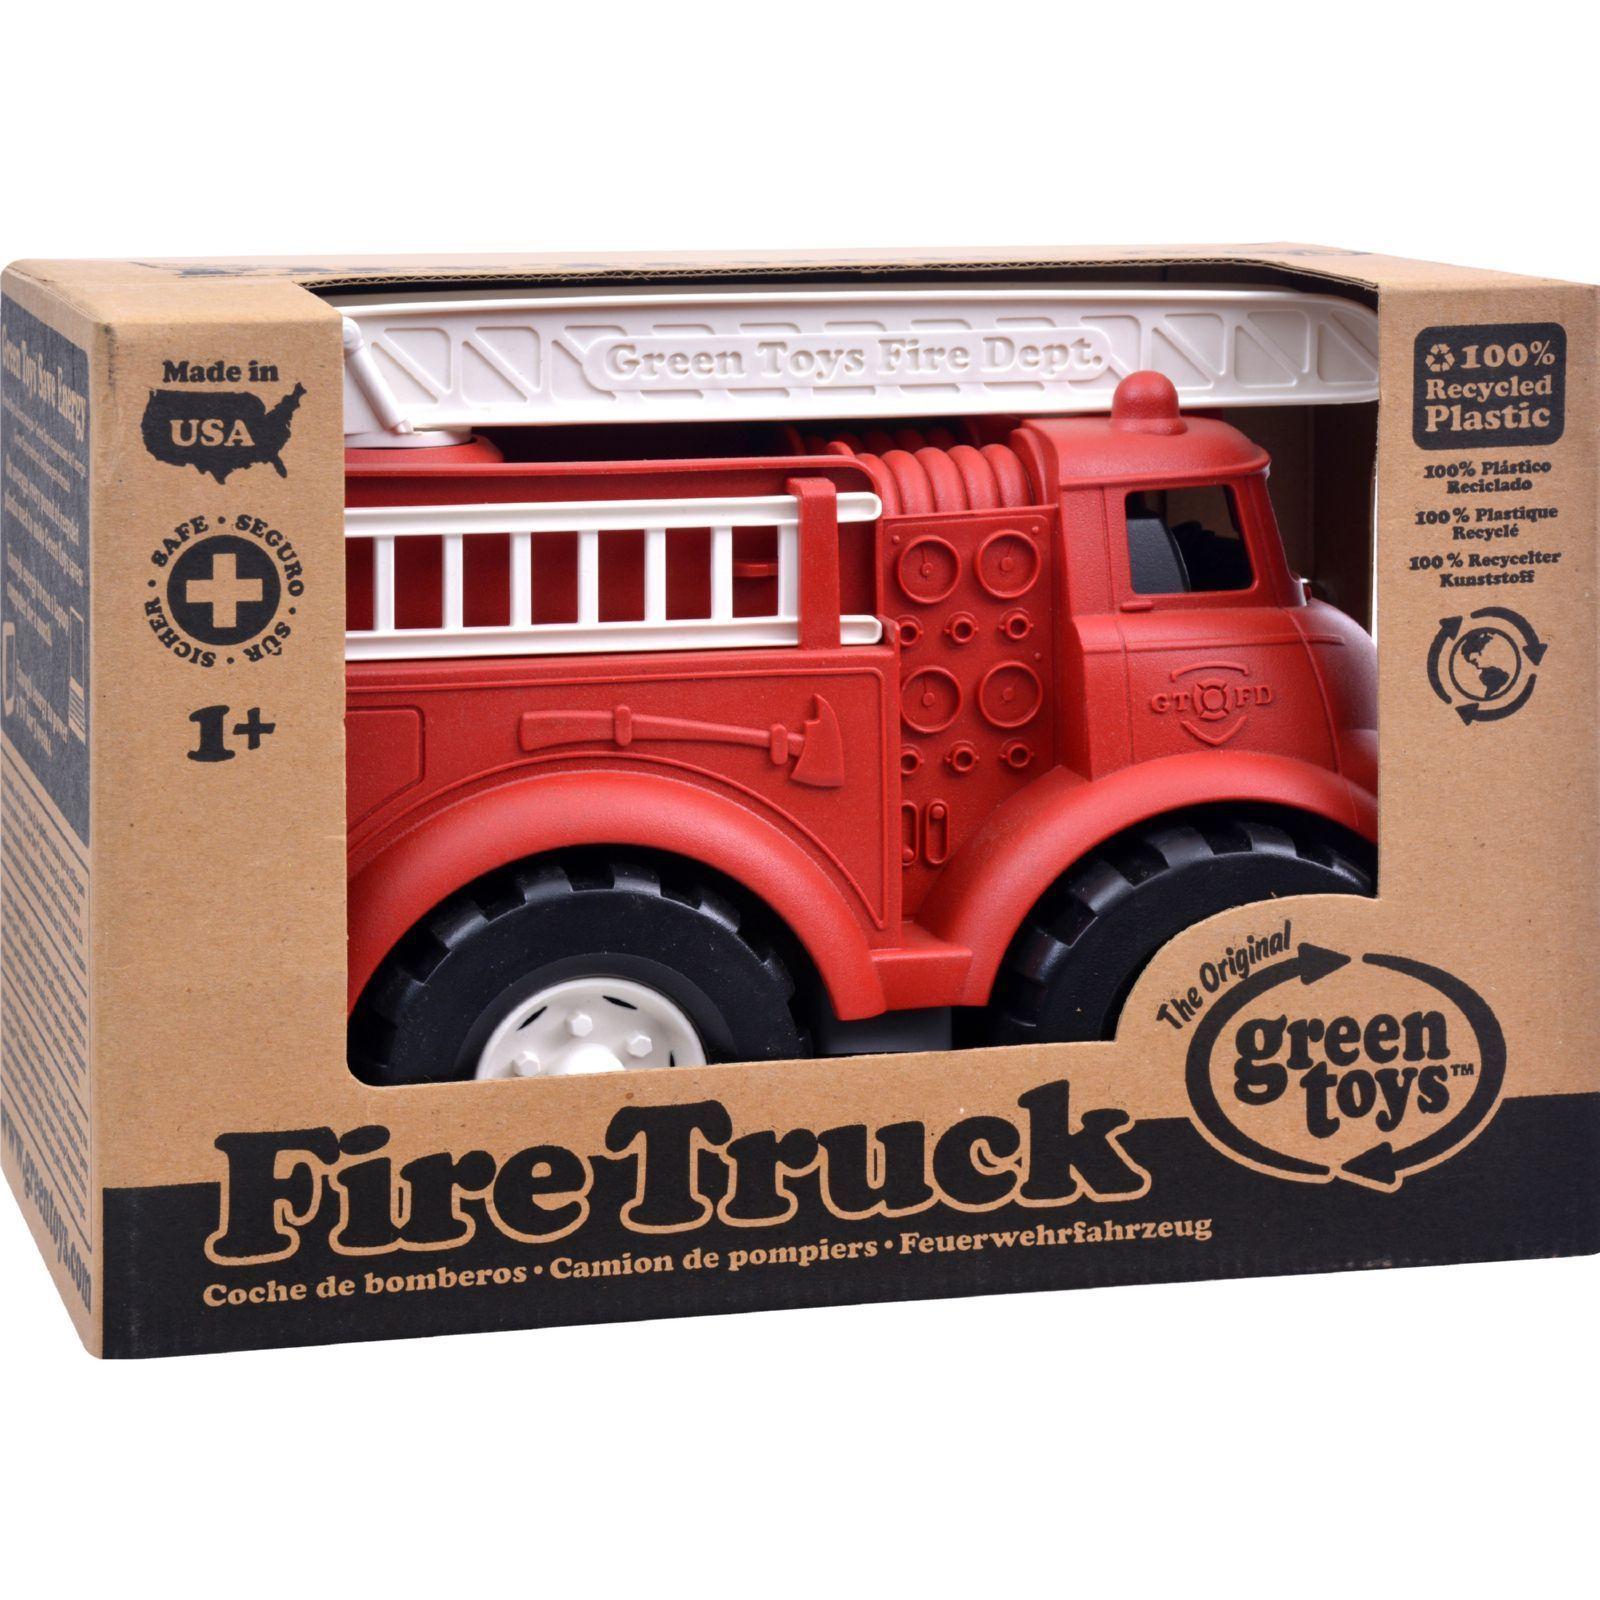 Red fire engine in manufacturer's packaging.